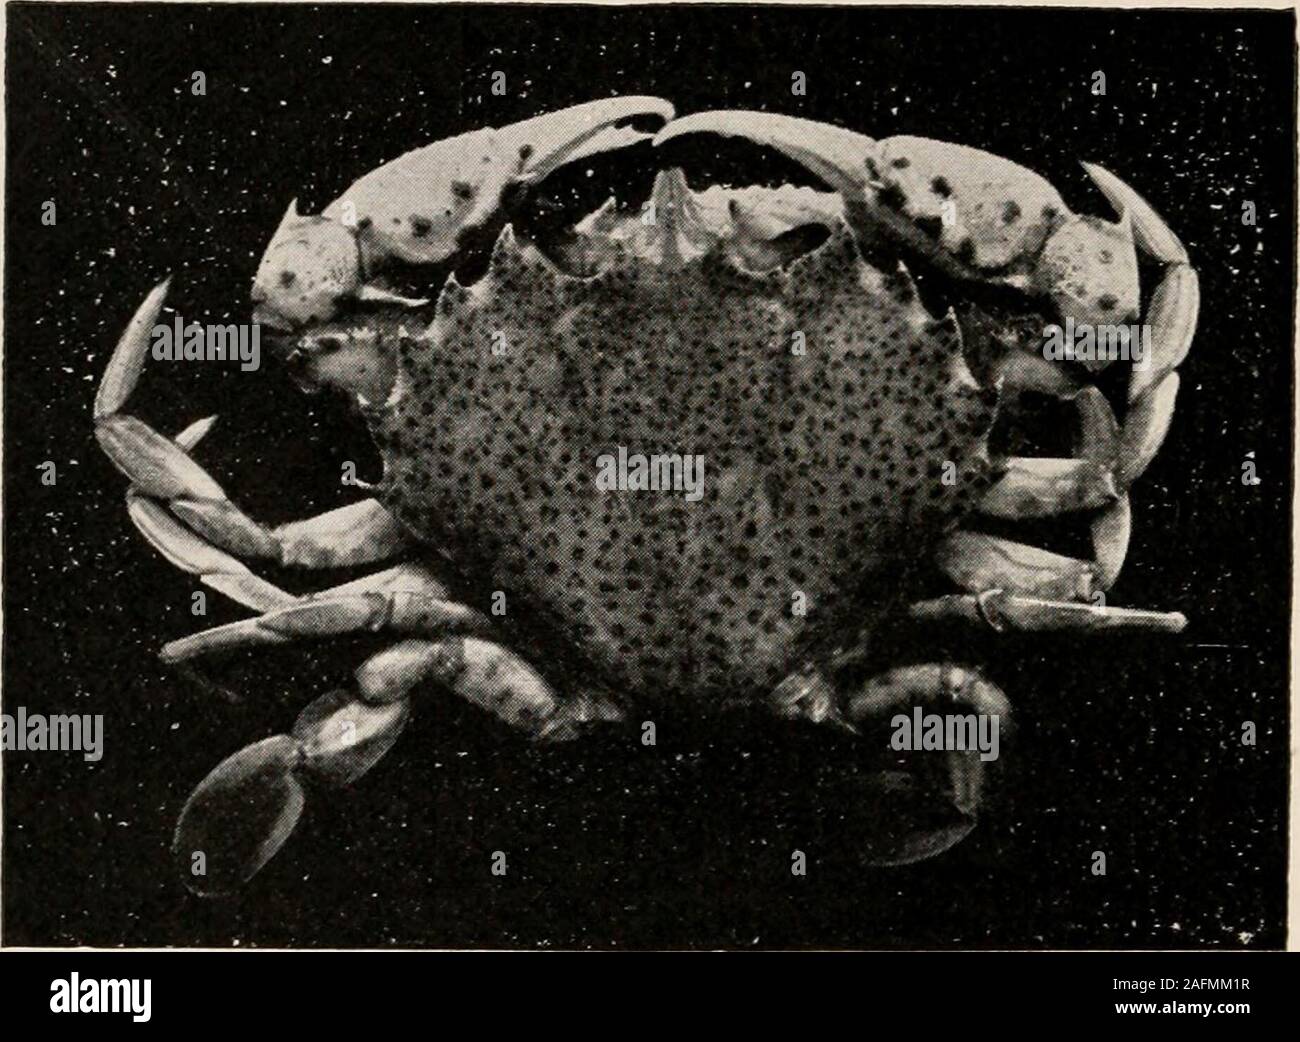 . Introduction to zoology; a guide to the study of animals, for the use of secondary schools;. FIG. 103.— Callinectes hastatus, blue crab. Reduced to one-third. Photo. by W. H. C. P. 110 ZOOLOGY ostreum (Fig. 105), found in the mantle chamber of theoyster, is eaten by us together with the oyster or separately.. FIG. 104. —Platyonichus ocellatus, lady oral). Reduced to one-third. Photo, by W. H. C. P. The fiddler crabs are representative of the square crabs.These are the familiar animals which crowd salt marshesand run sideways to and from their burrows. One claw is much larger than the other.W Stock Photo